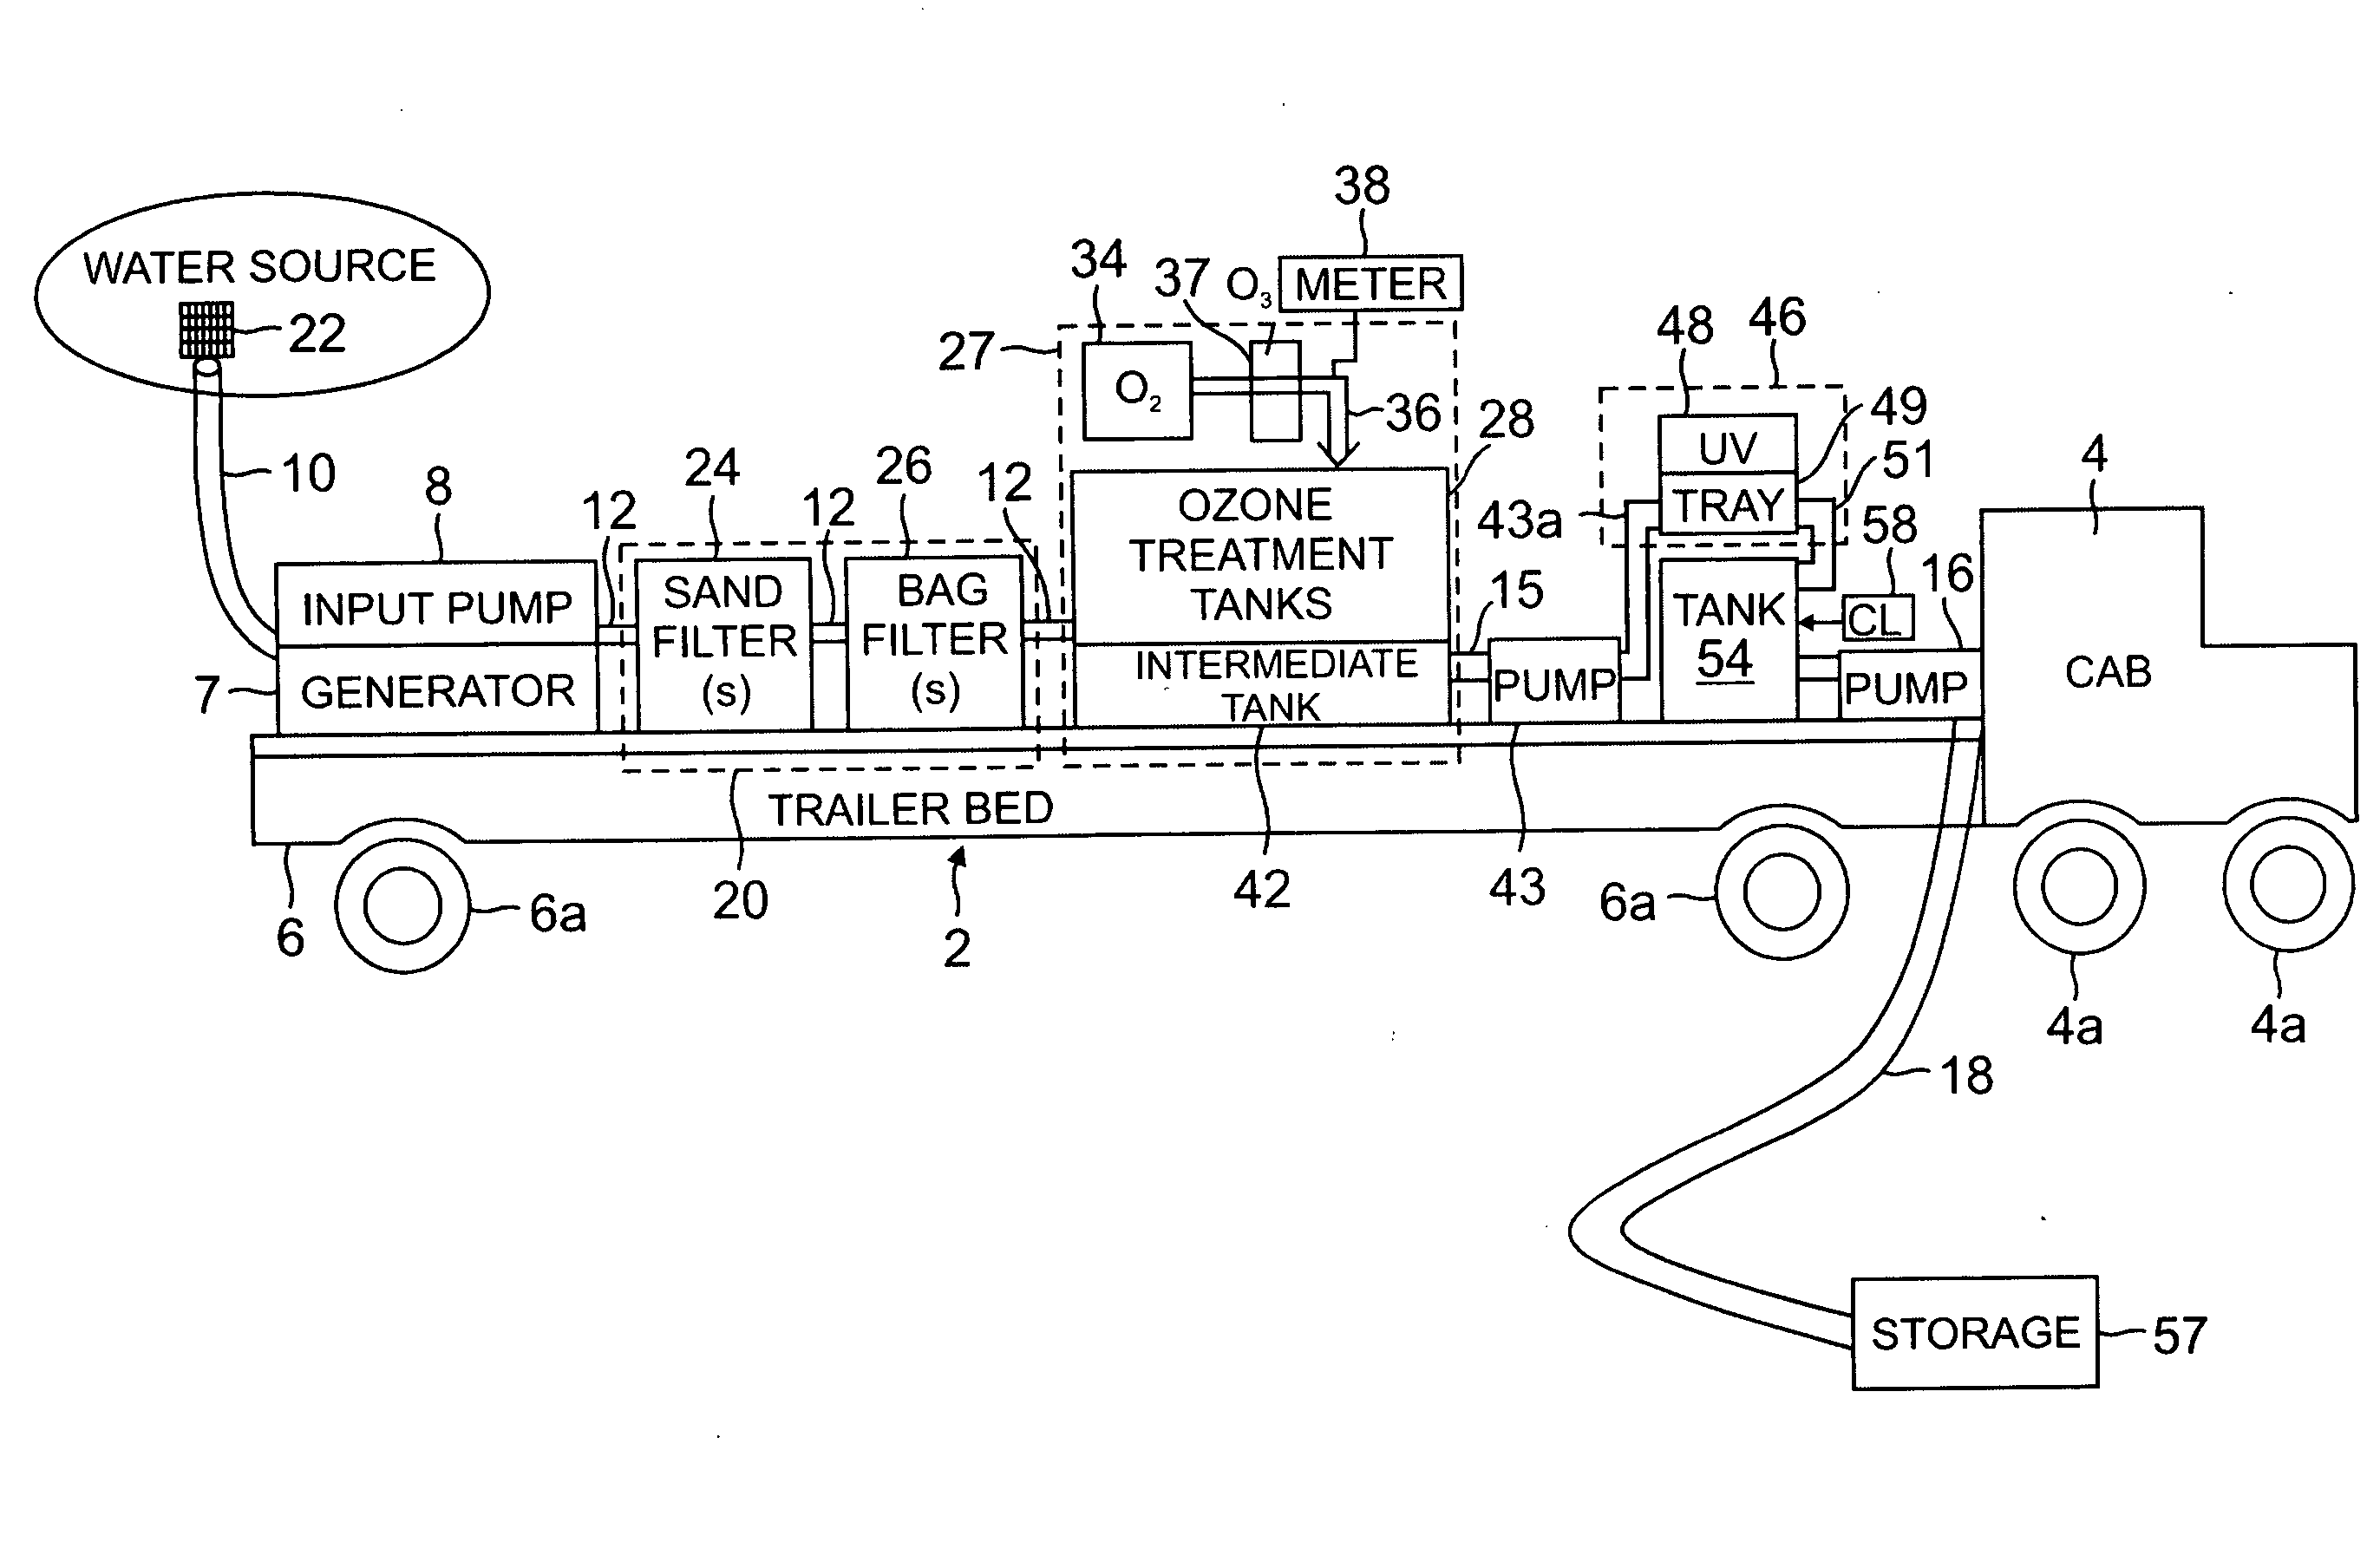 System and method of water treatment